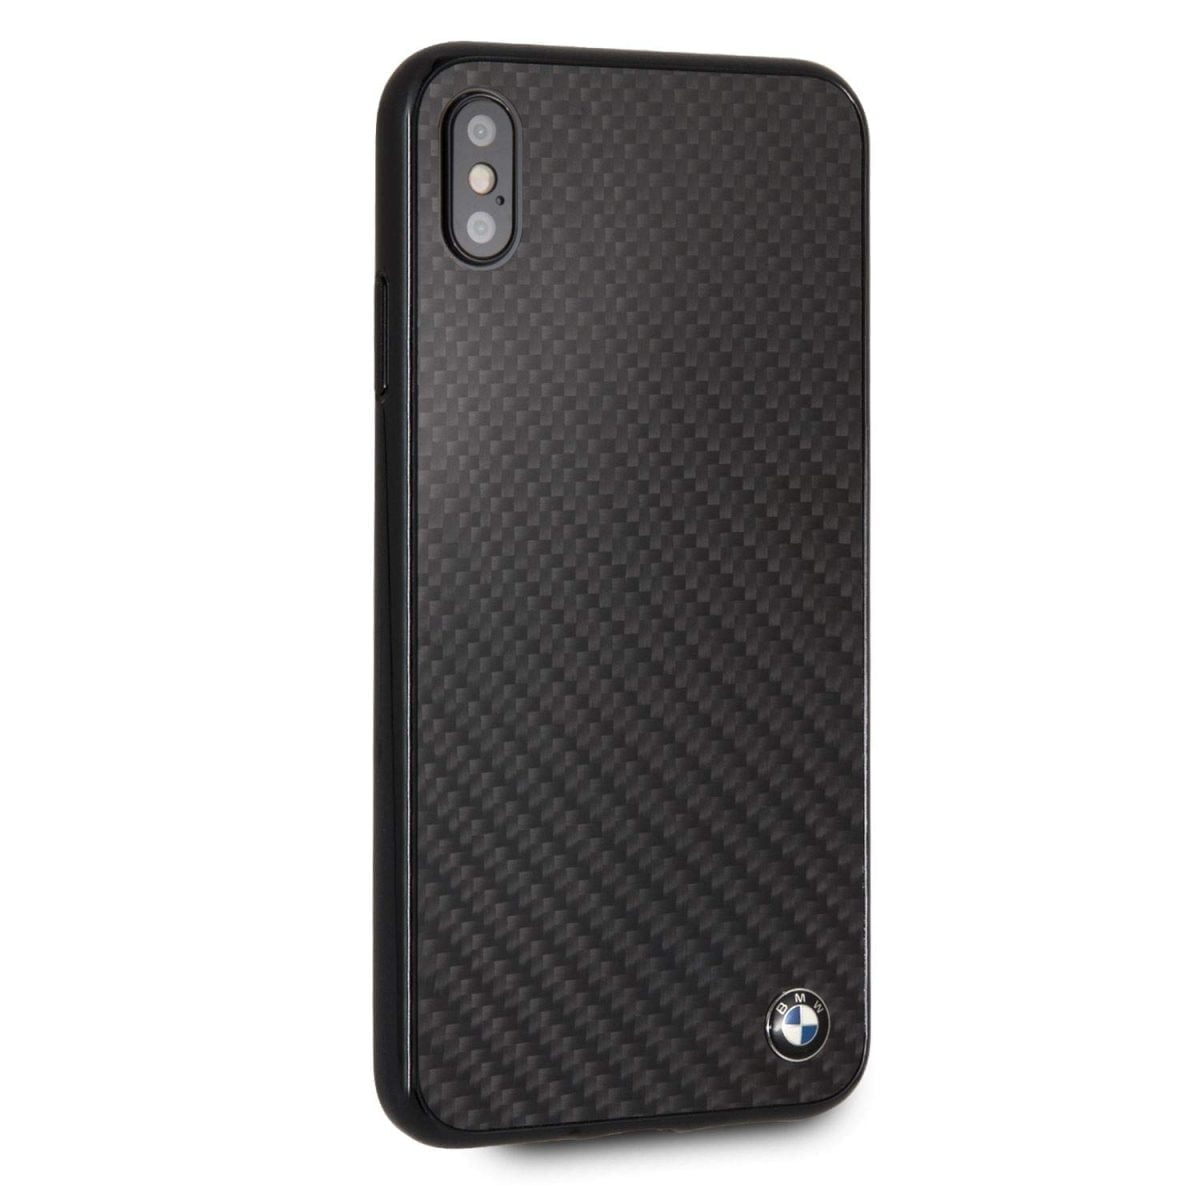 Cg Mobile Bmw Iphone Xs Max Case Black Carbon Hard Cell Phone Case Carbon Fiber Easily Accessible Ports Officially Licensed 06 غطاء آيفون ايفون Xs ألياف الكربون السوداء (Bmw)